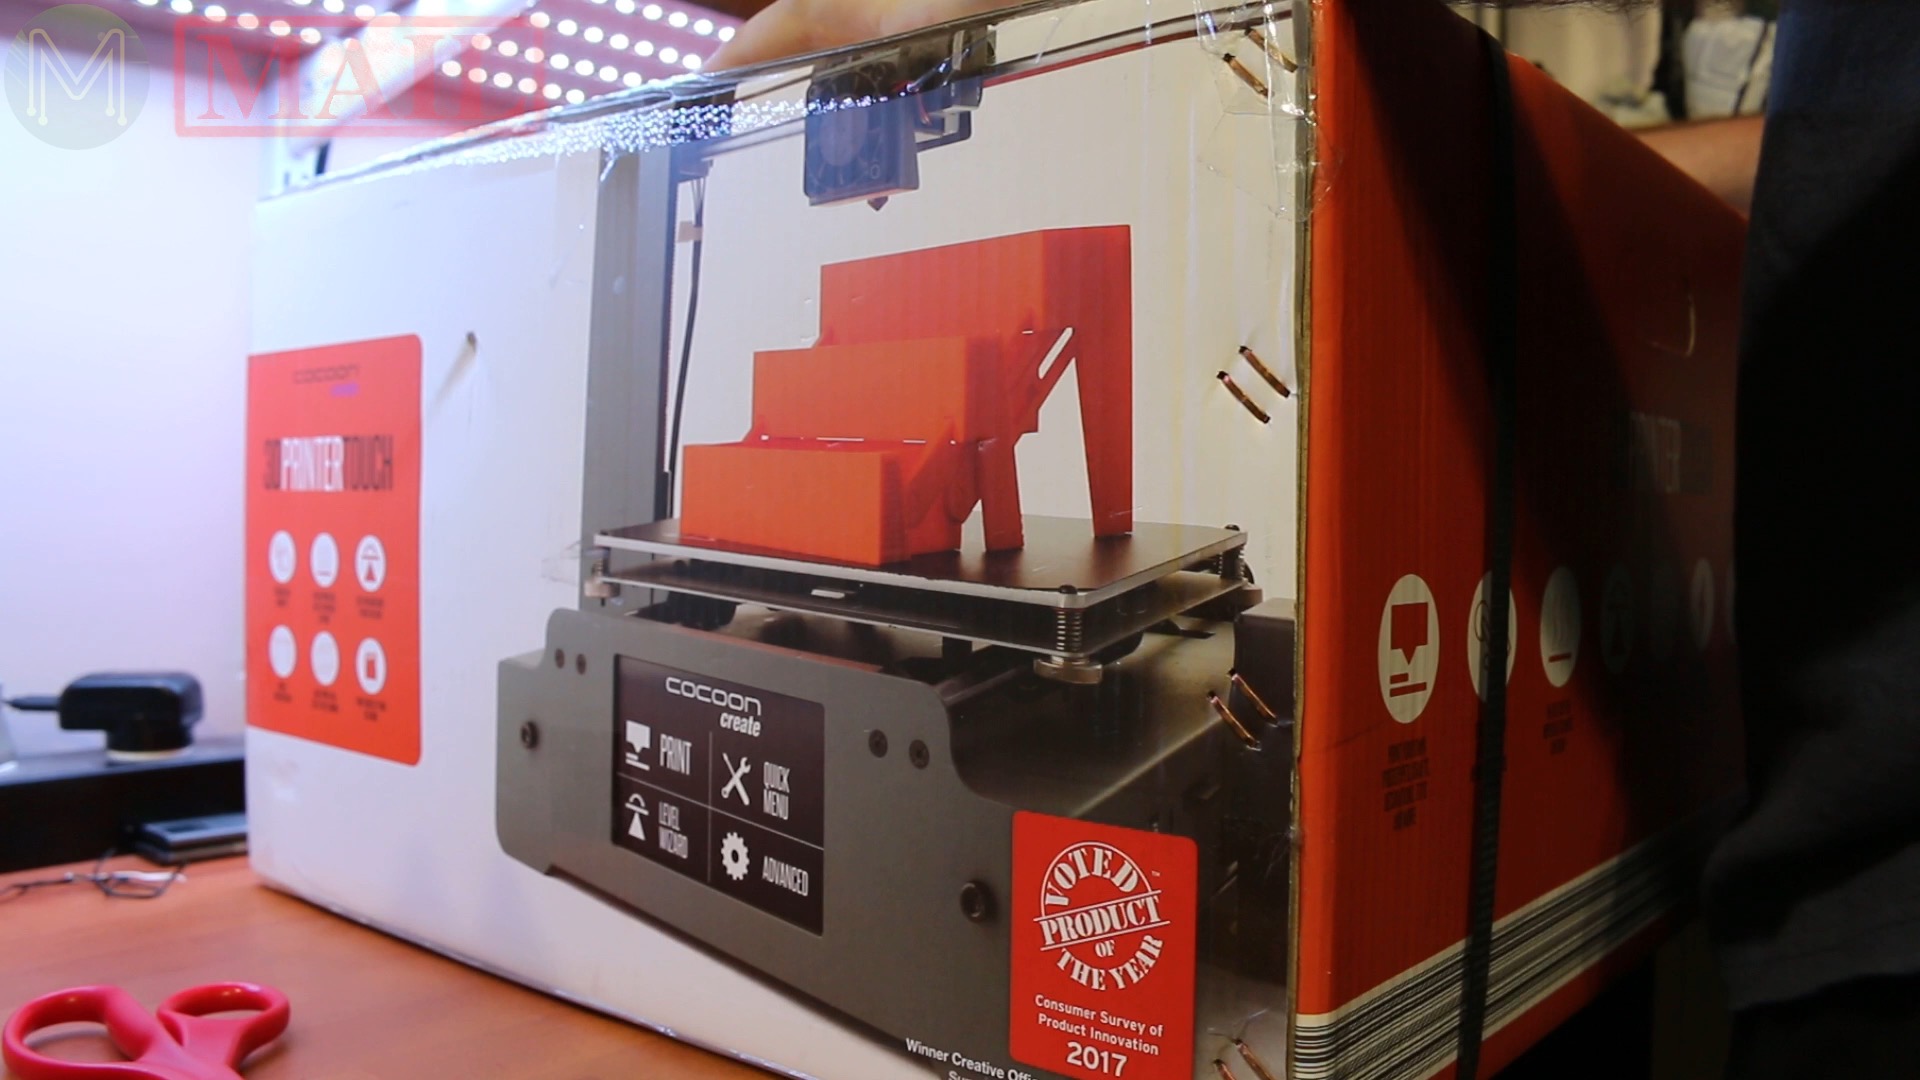 Optimistisch vrachtauto lotus MickMake Mail #26: ALDI 3D Printer - Cocoon Create Touch // News - MickMake  - Live. Learn. Make.